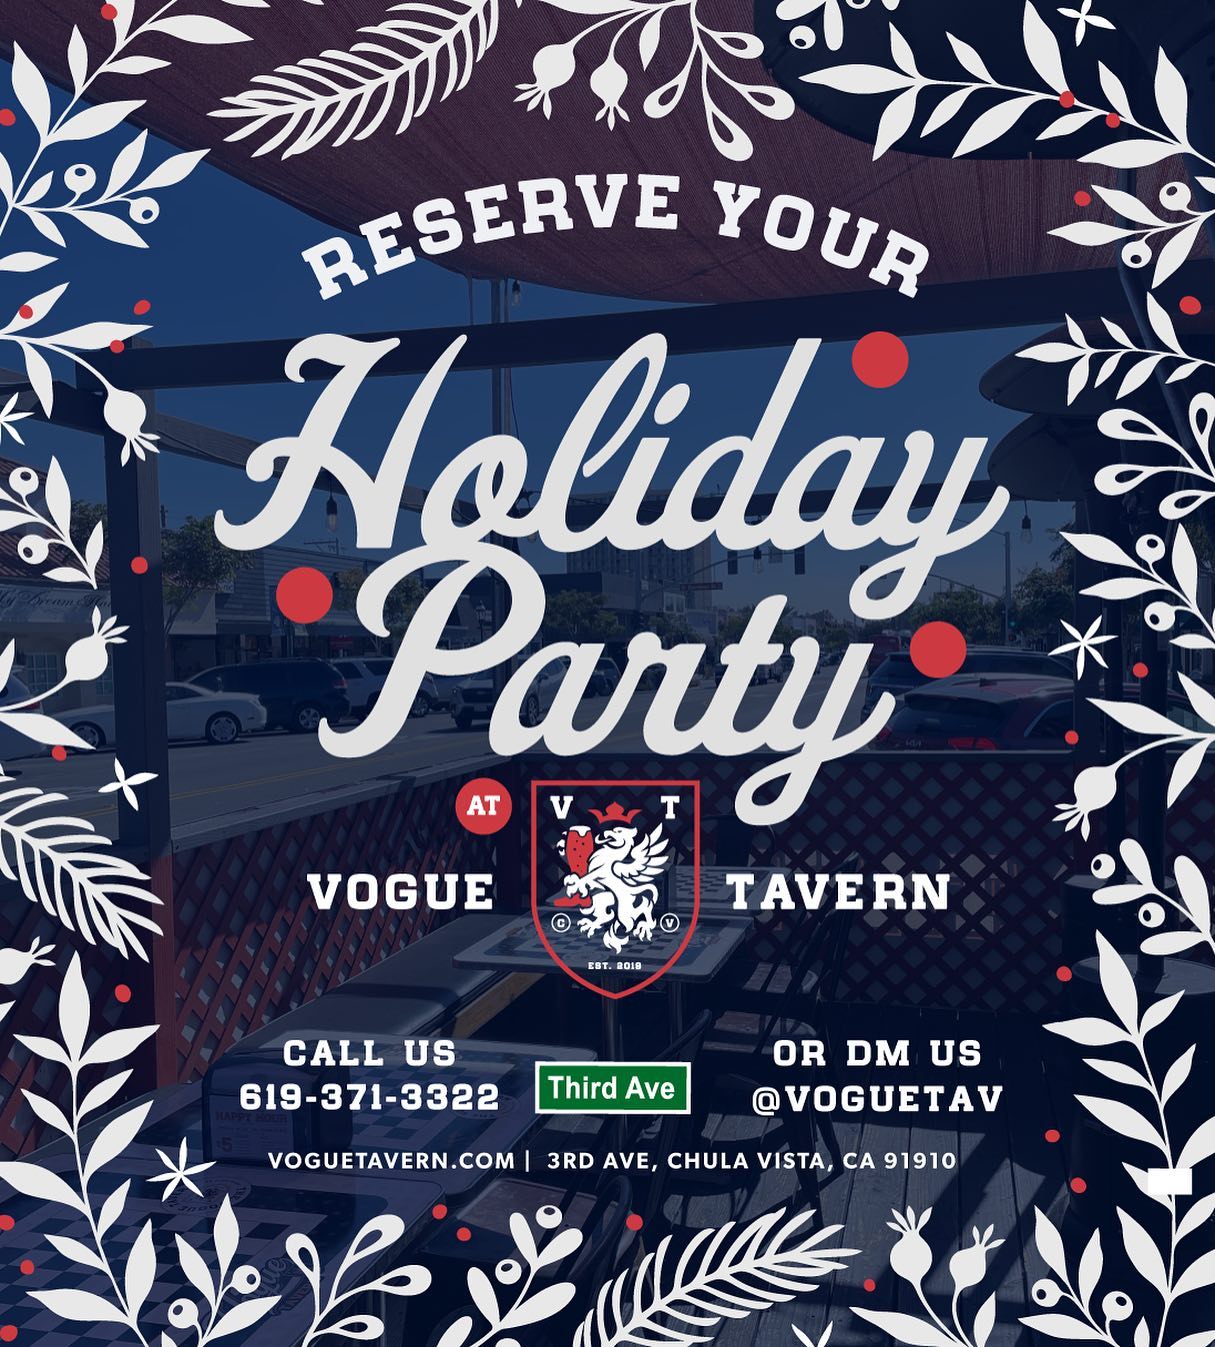 Reserve your holiday Party now